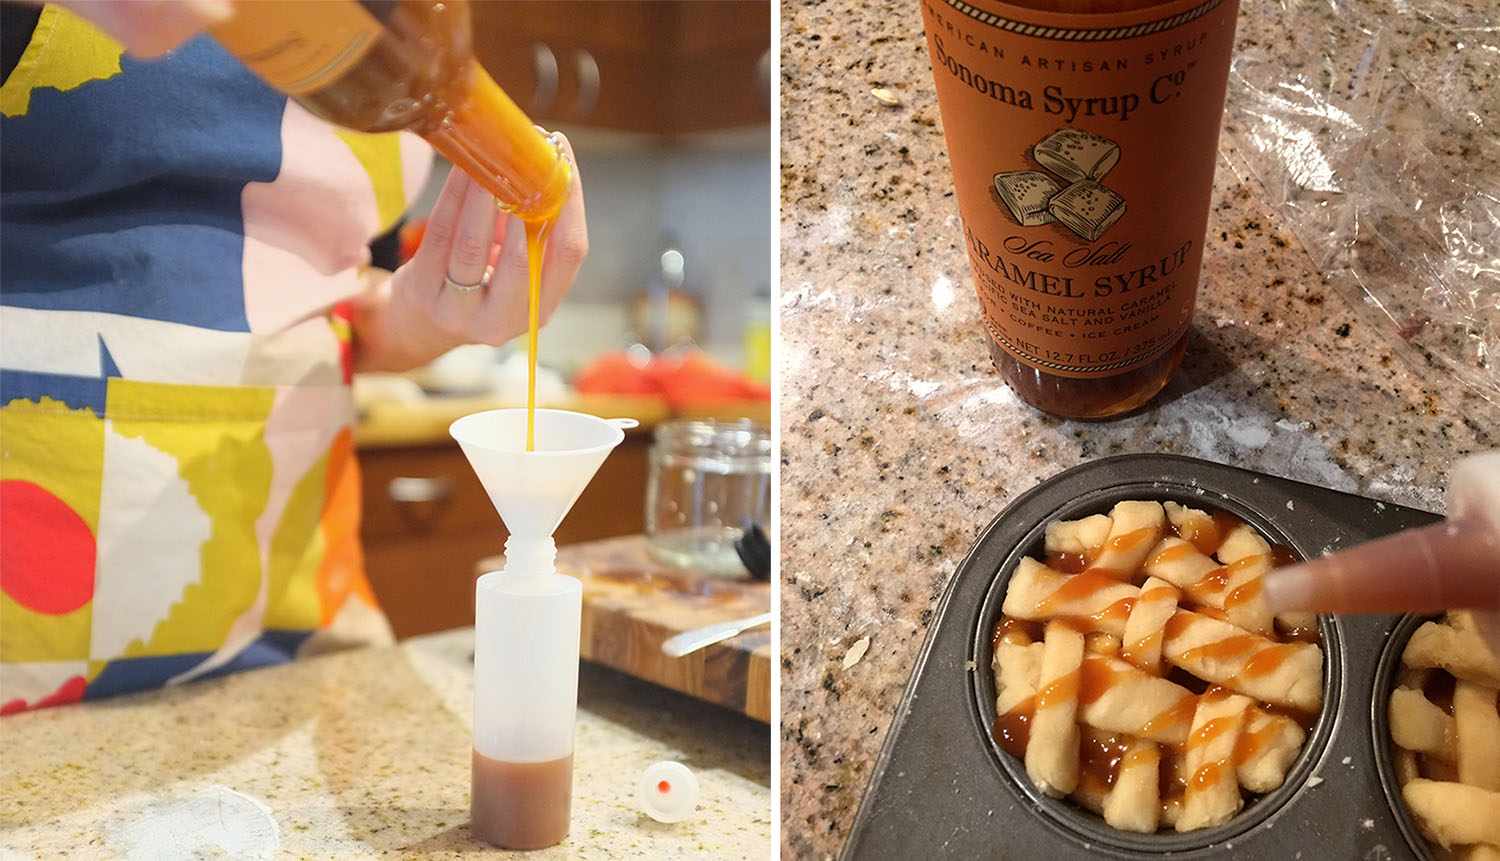 Sonoma Syrup Co. Caramel on Apple Pies